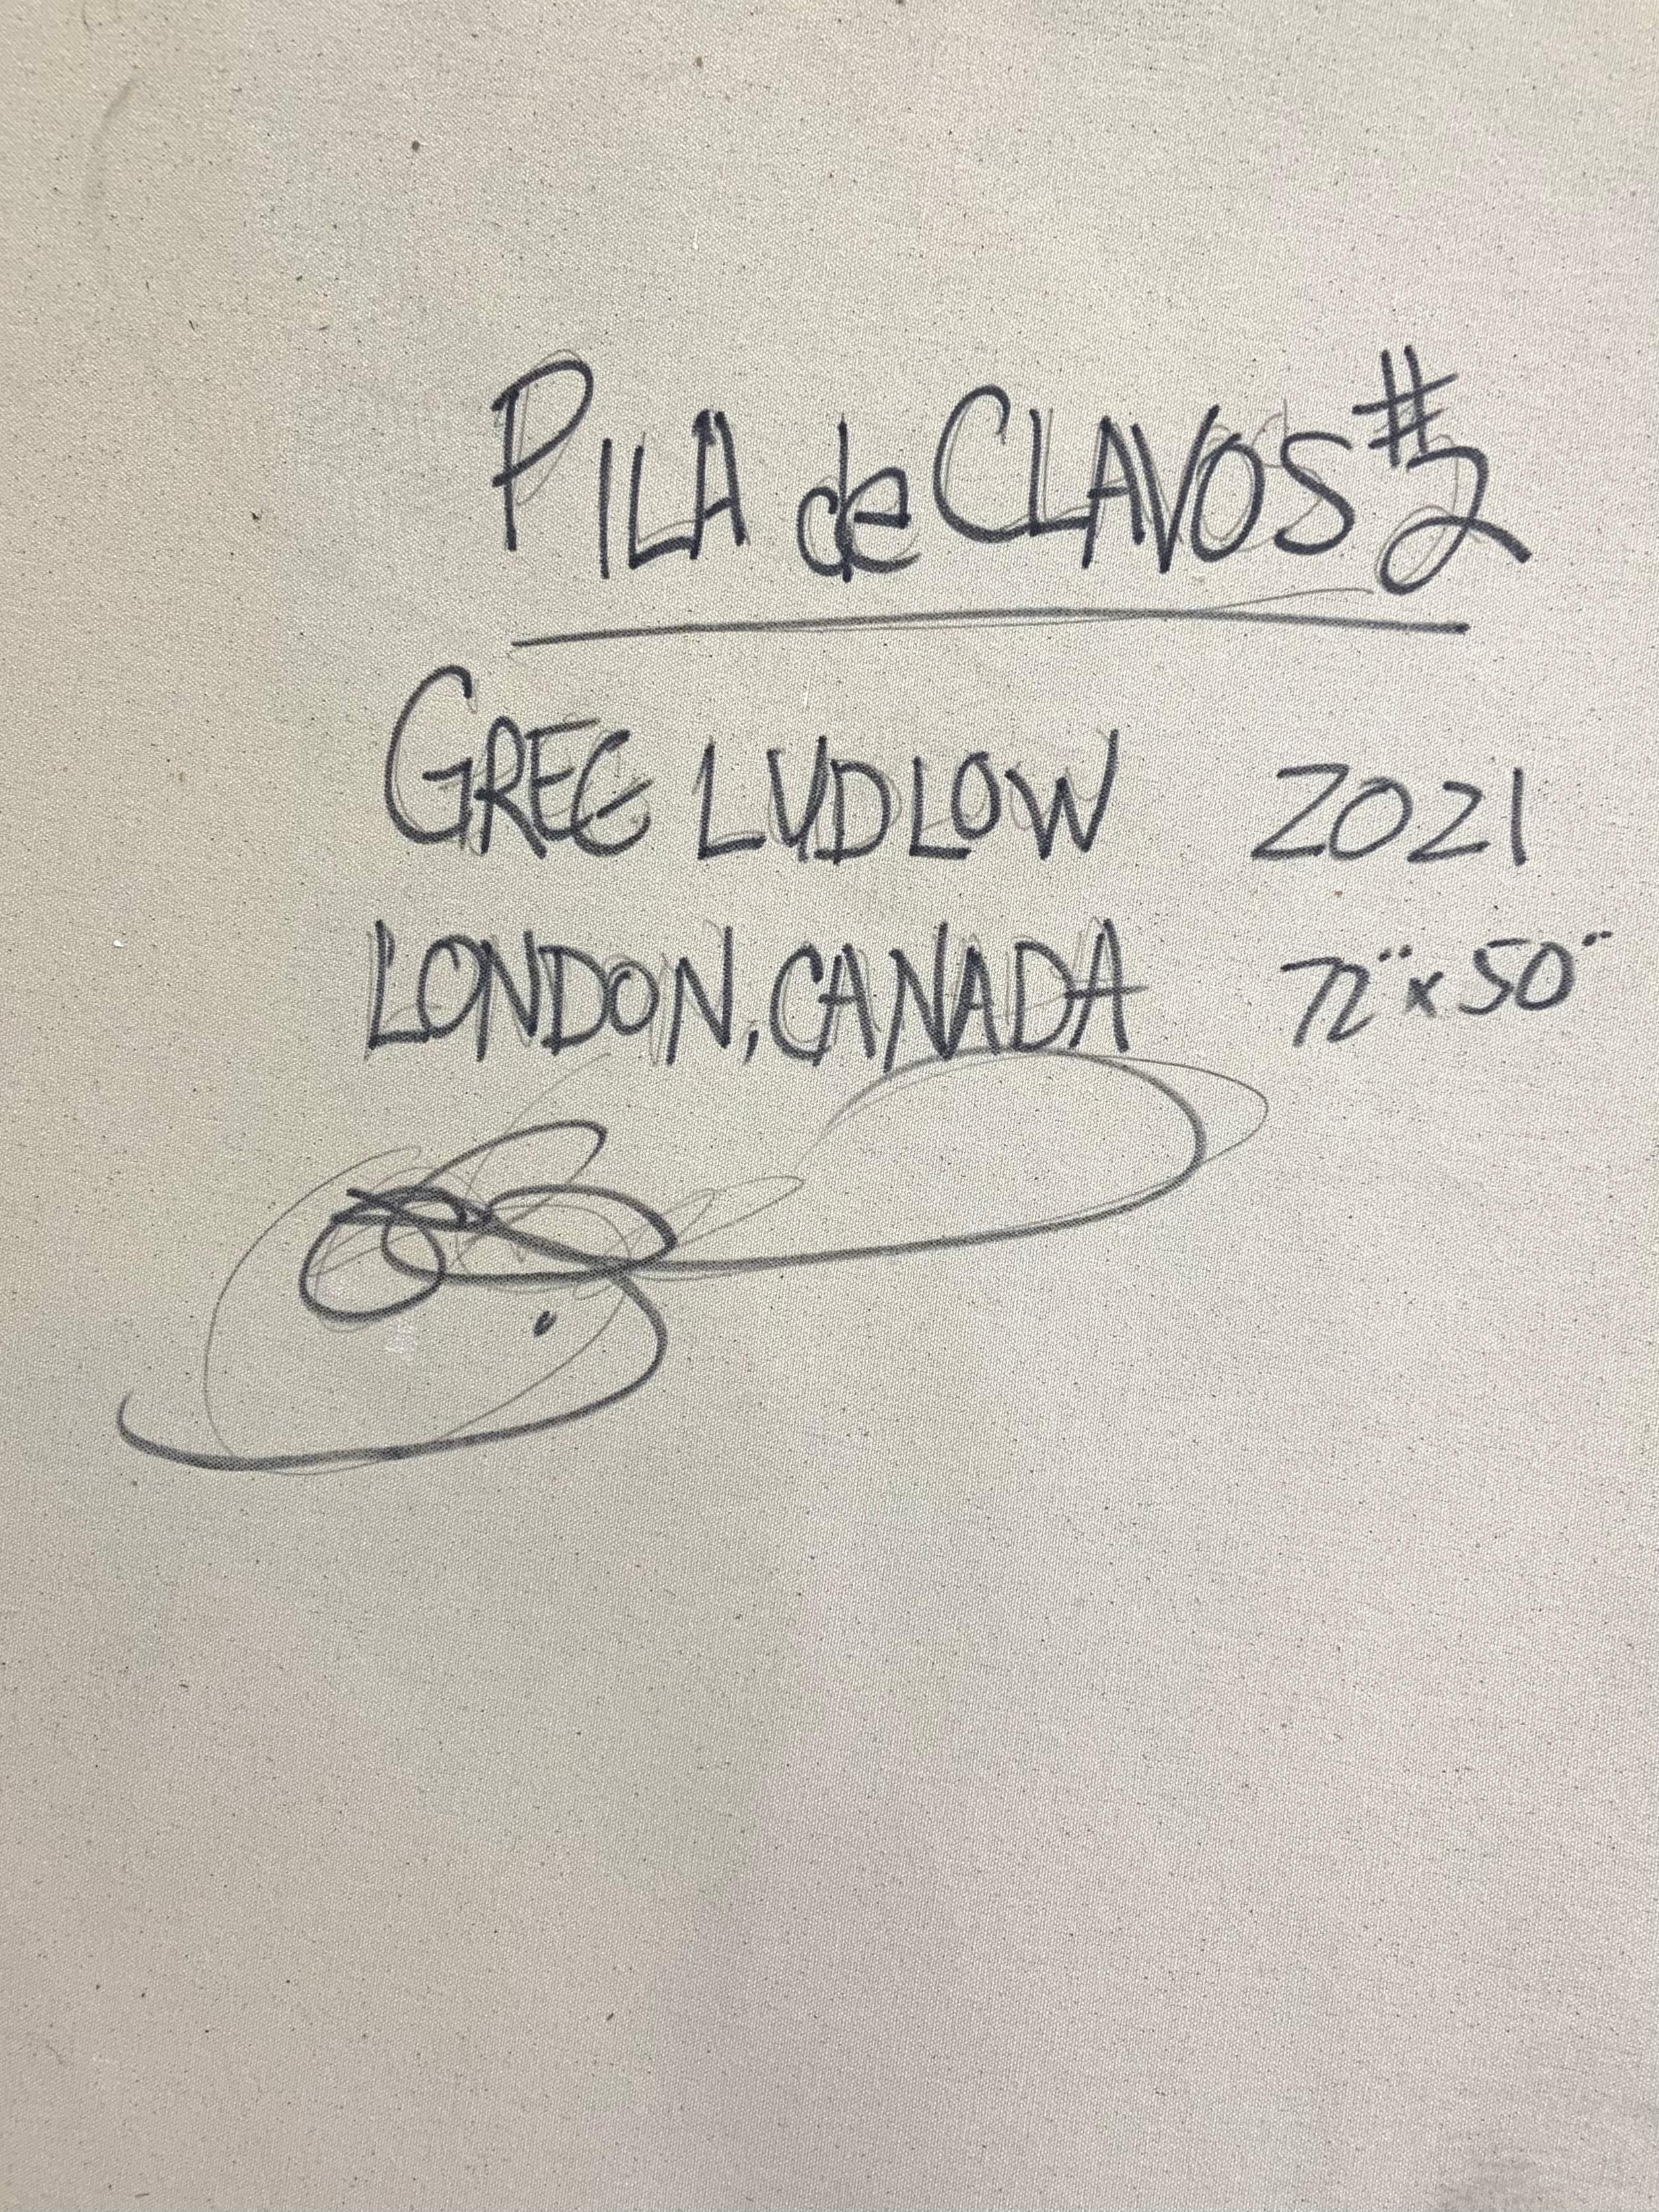 Artist: Greg Ludlow
Title: Pila de Clavos
Medium: Acrylic and Pencil on Canvas
Size: 72 x 50 inches
Year: 2021